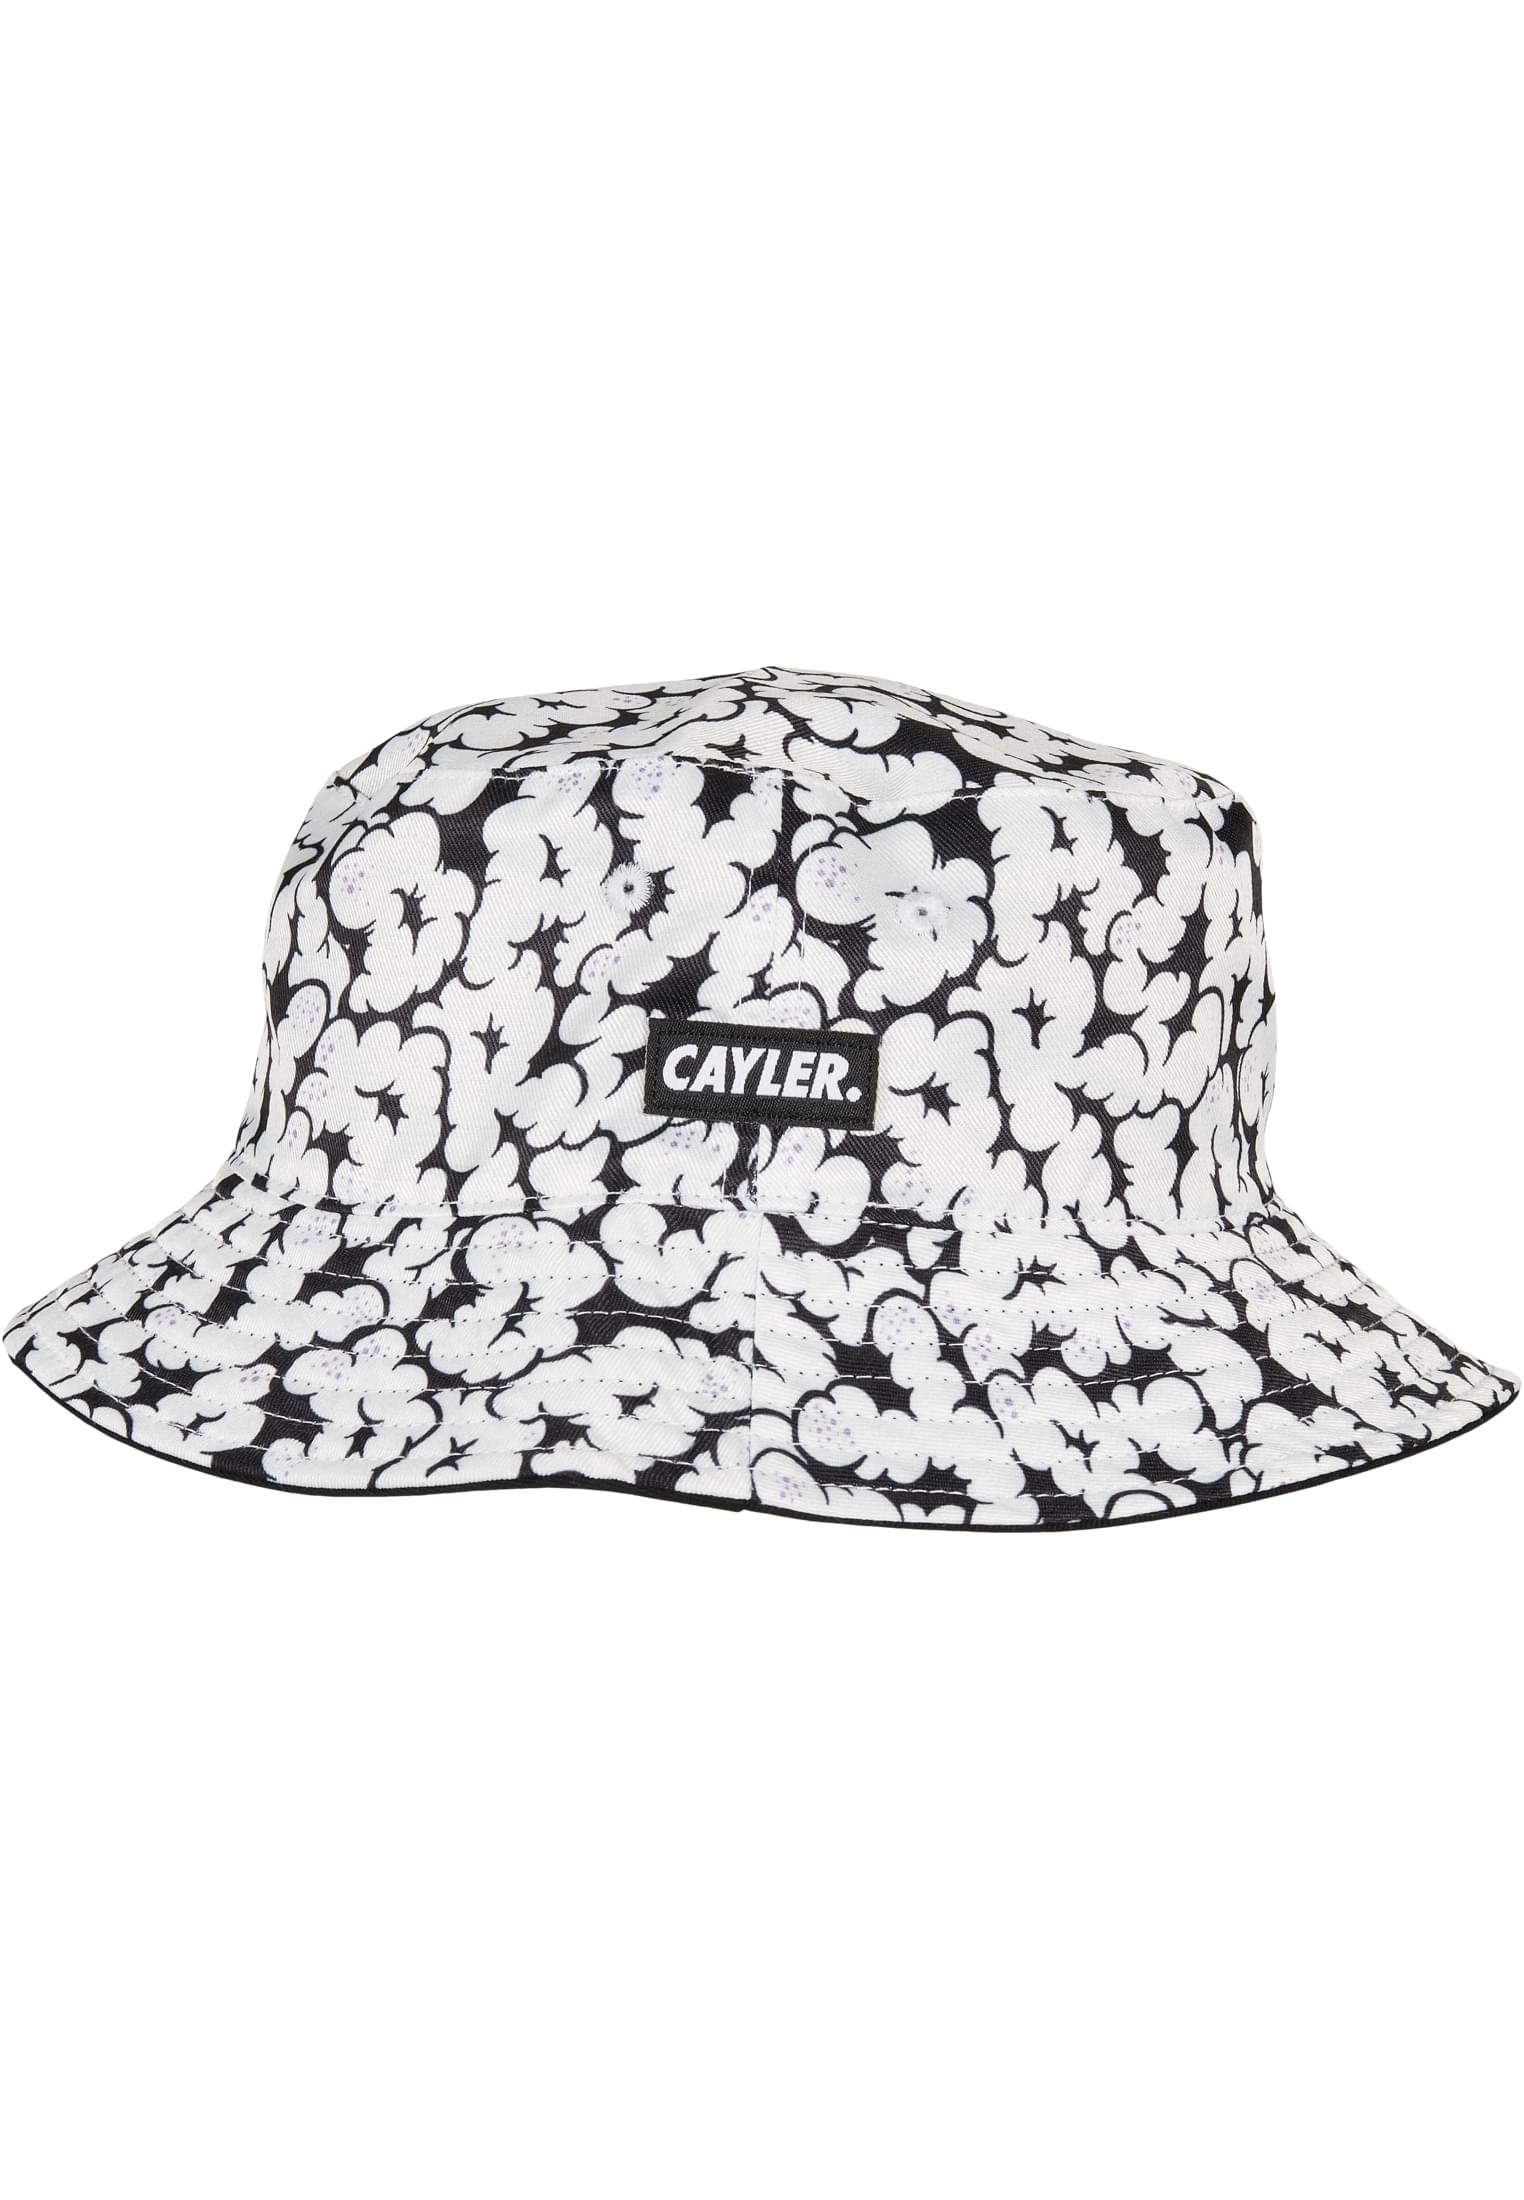 Day Dreamin Reversible Bucket Hat white/mc one size